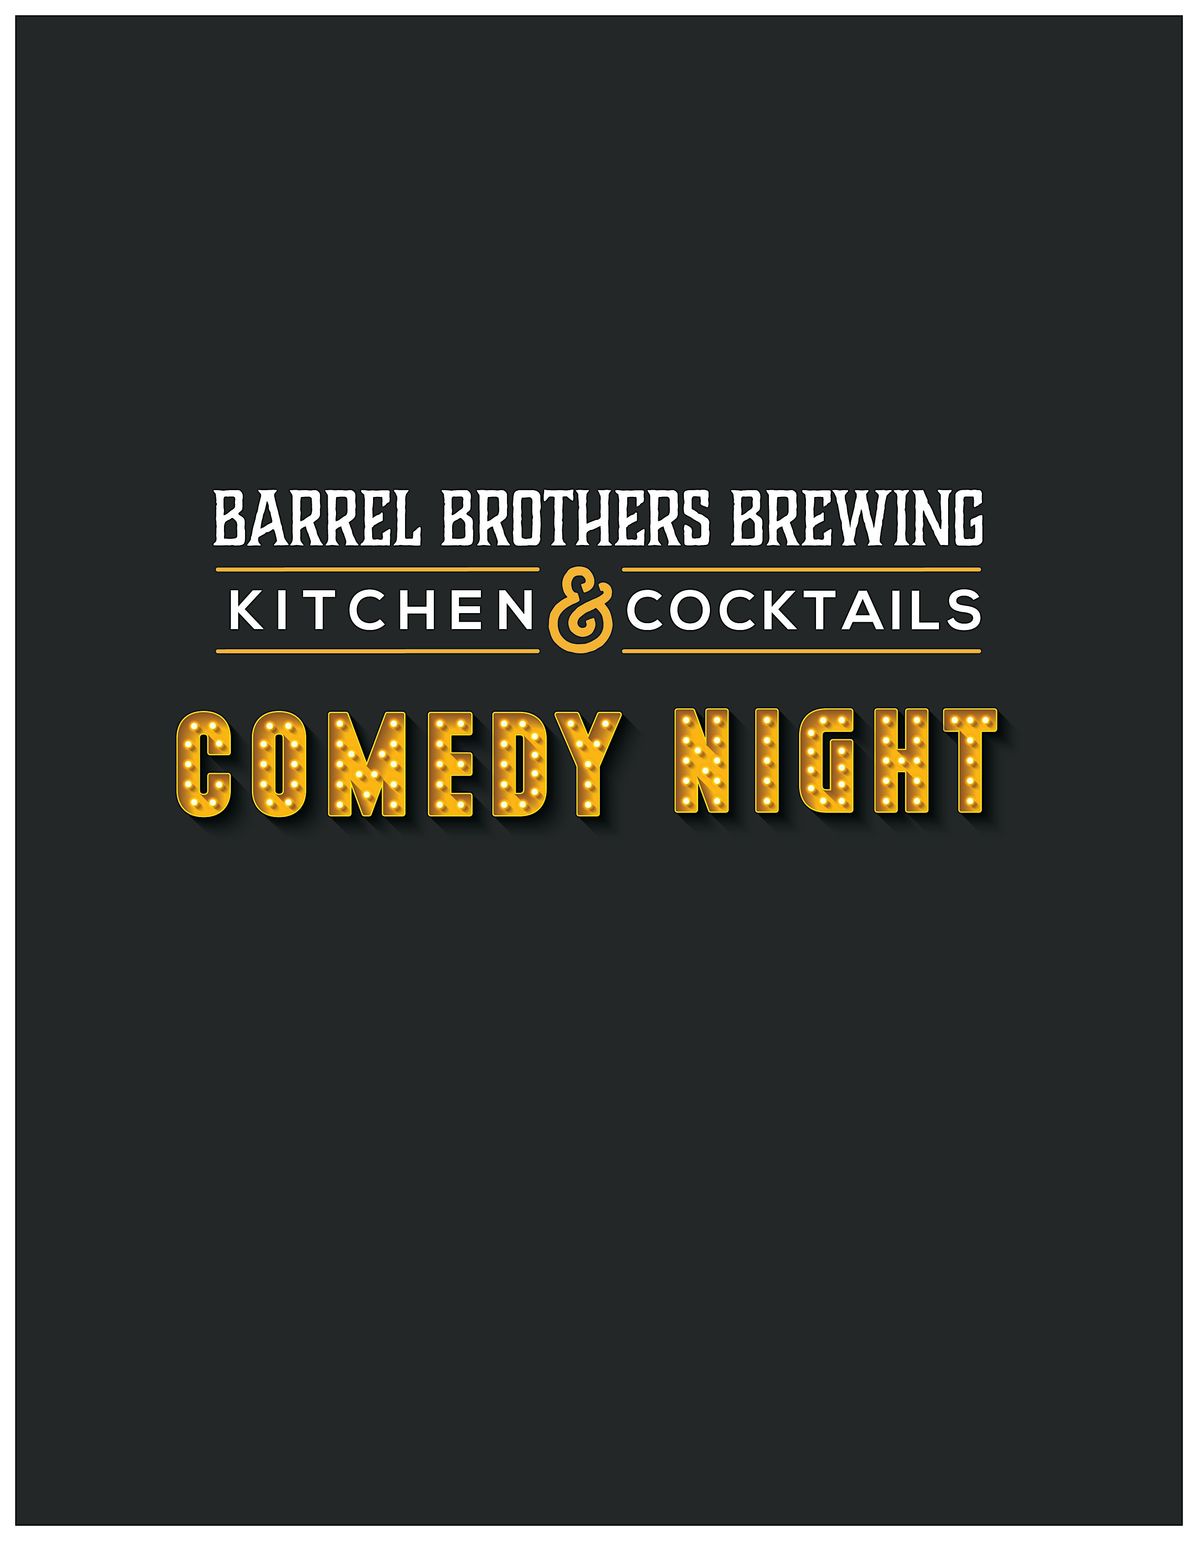 Comedy Night at Barrel Brothers Brewing Kitchen and Cocktails